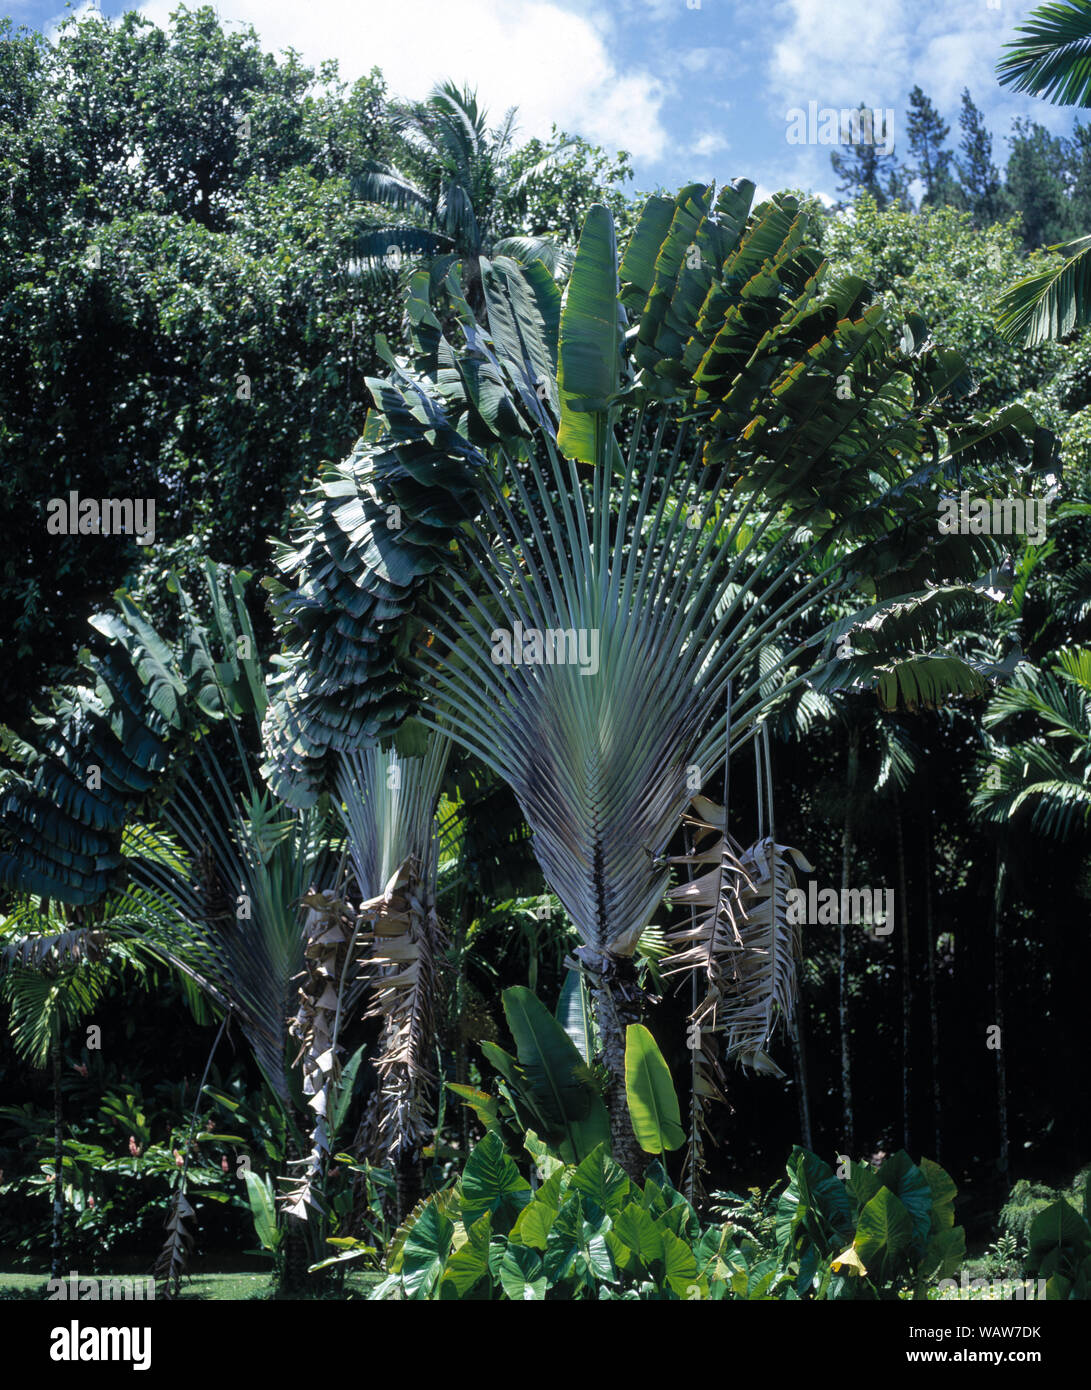 tropical garden with large tropical plants Stock Photo